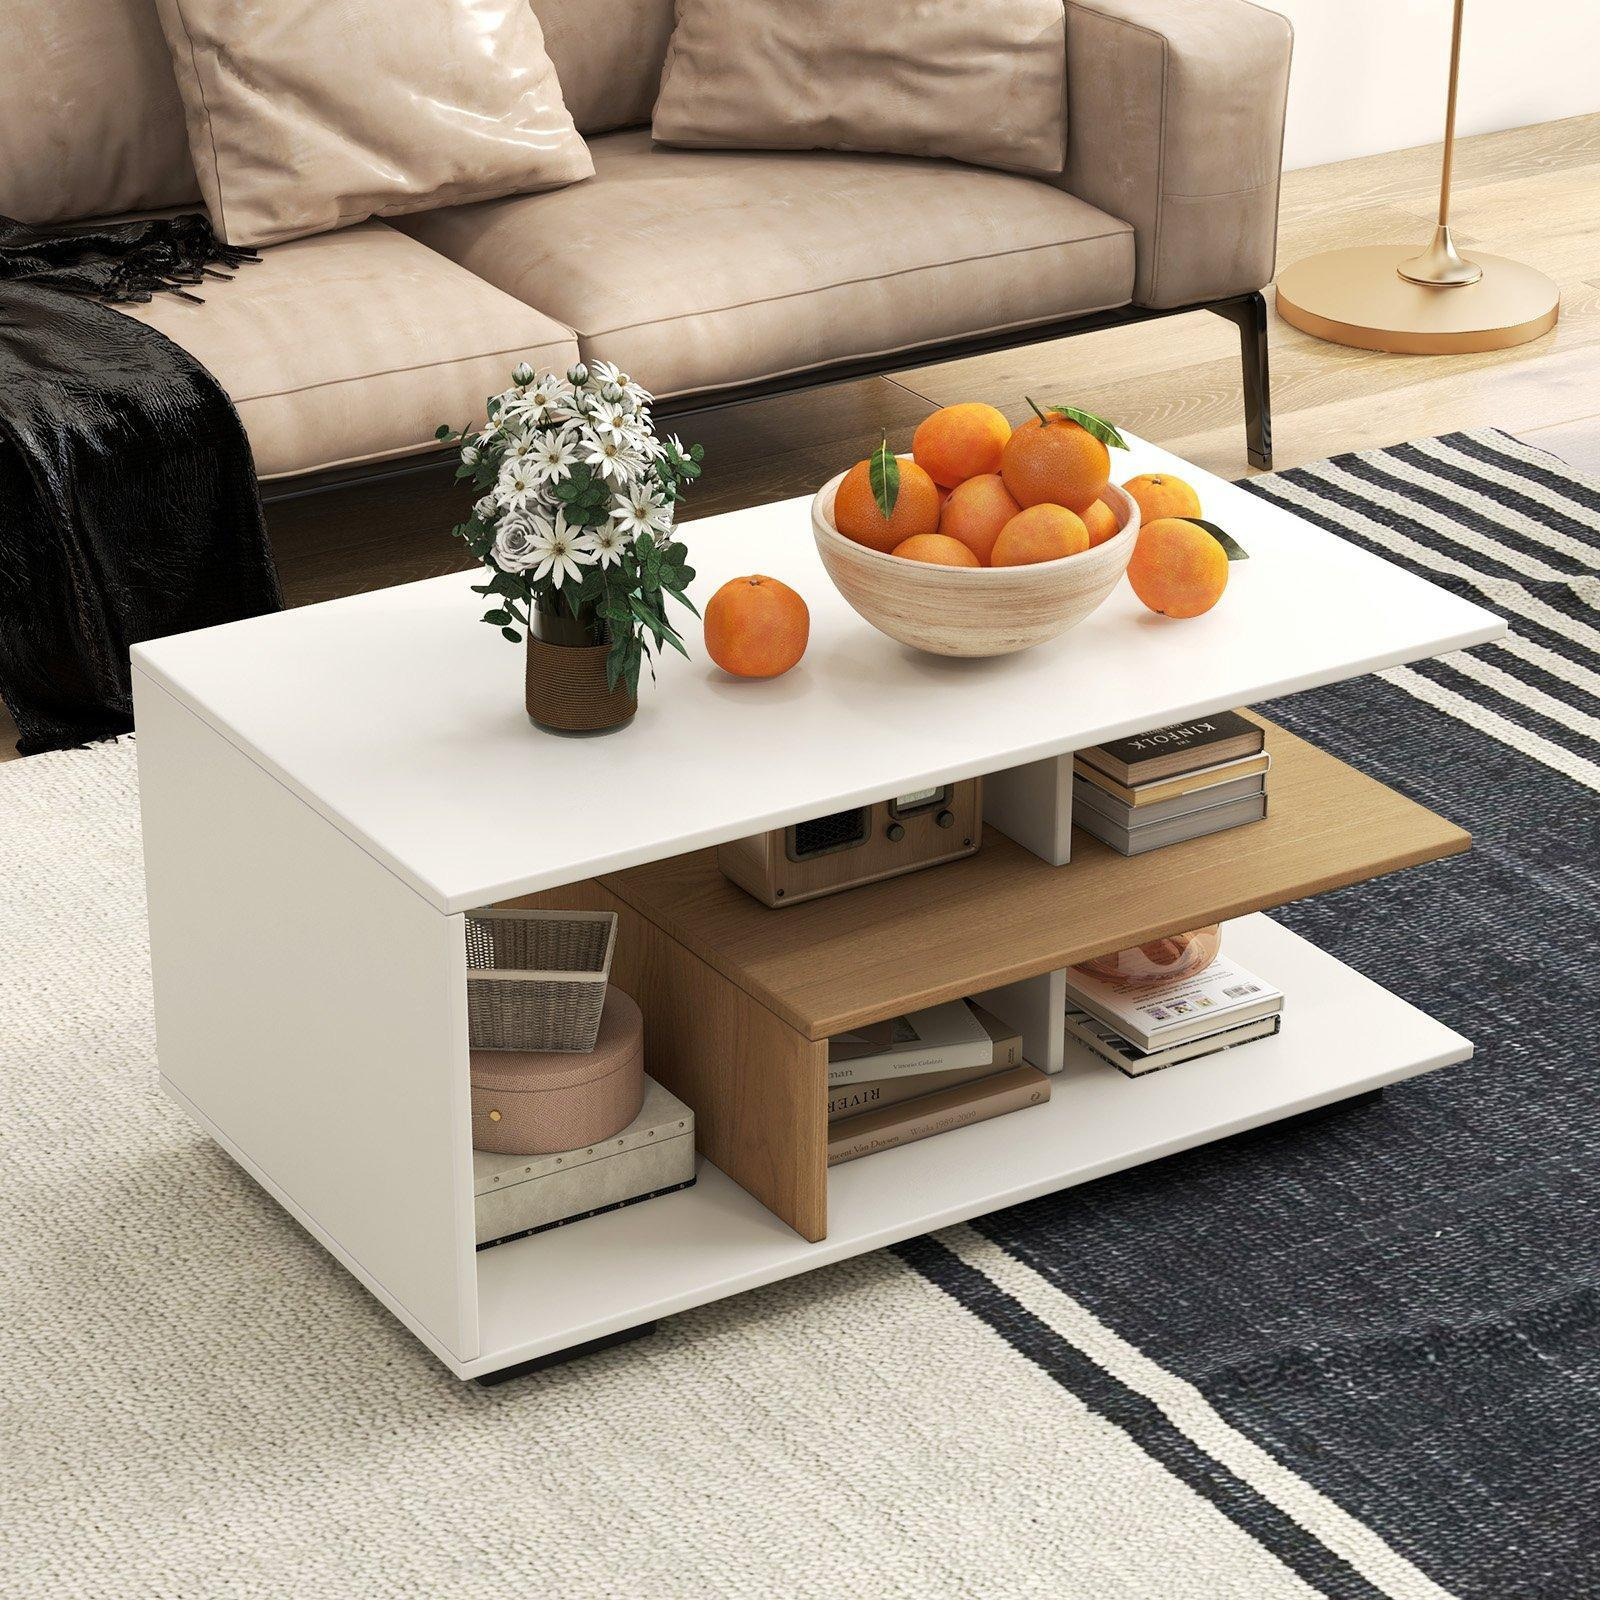 Modern Rectangular Center Table Wooden Coffee Table w/ L-shaped Middle Shelf - image 1